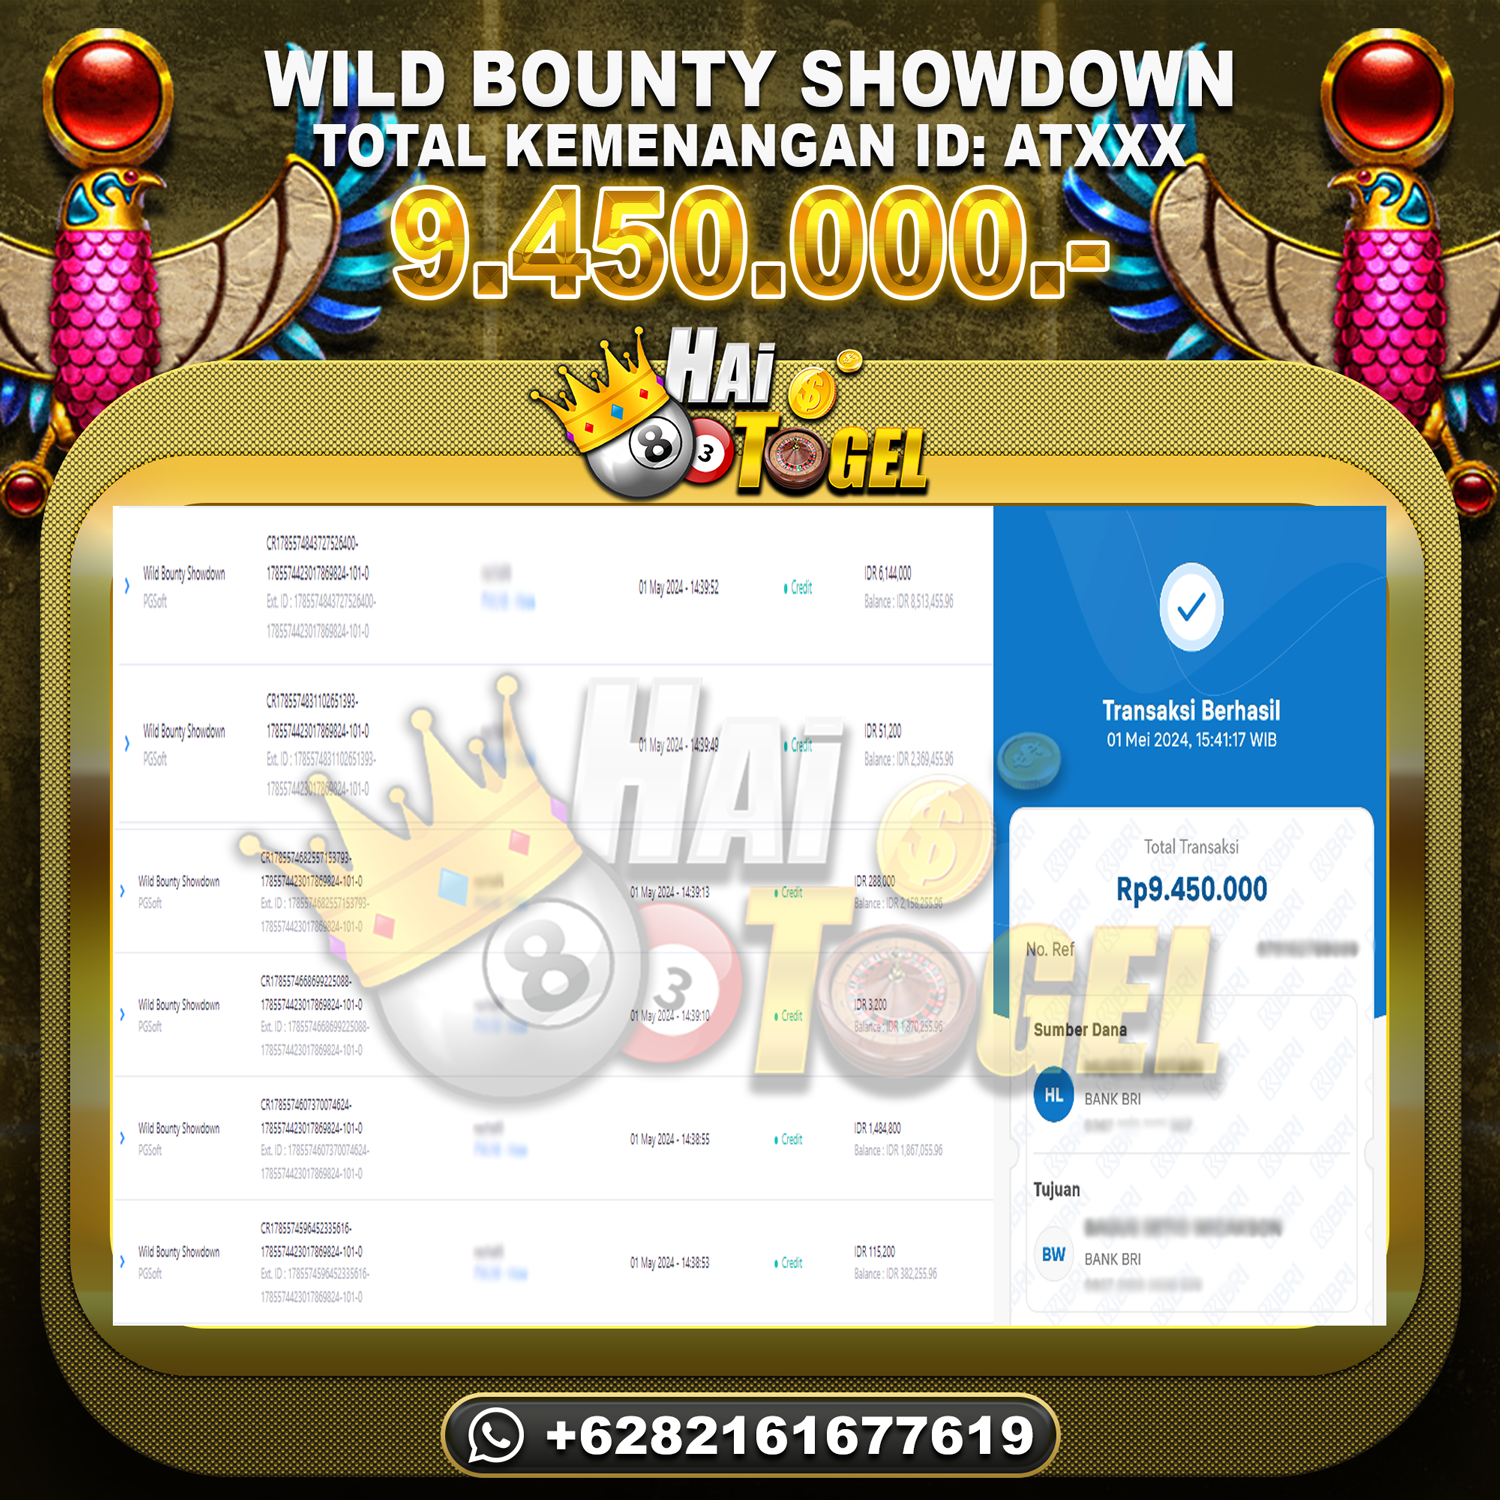 You are currently viewing BUKTI JP SLOT HAITOGEL WILD BOUNTY SHOWDOWN RP. 9.450.000